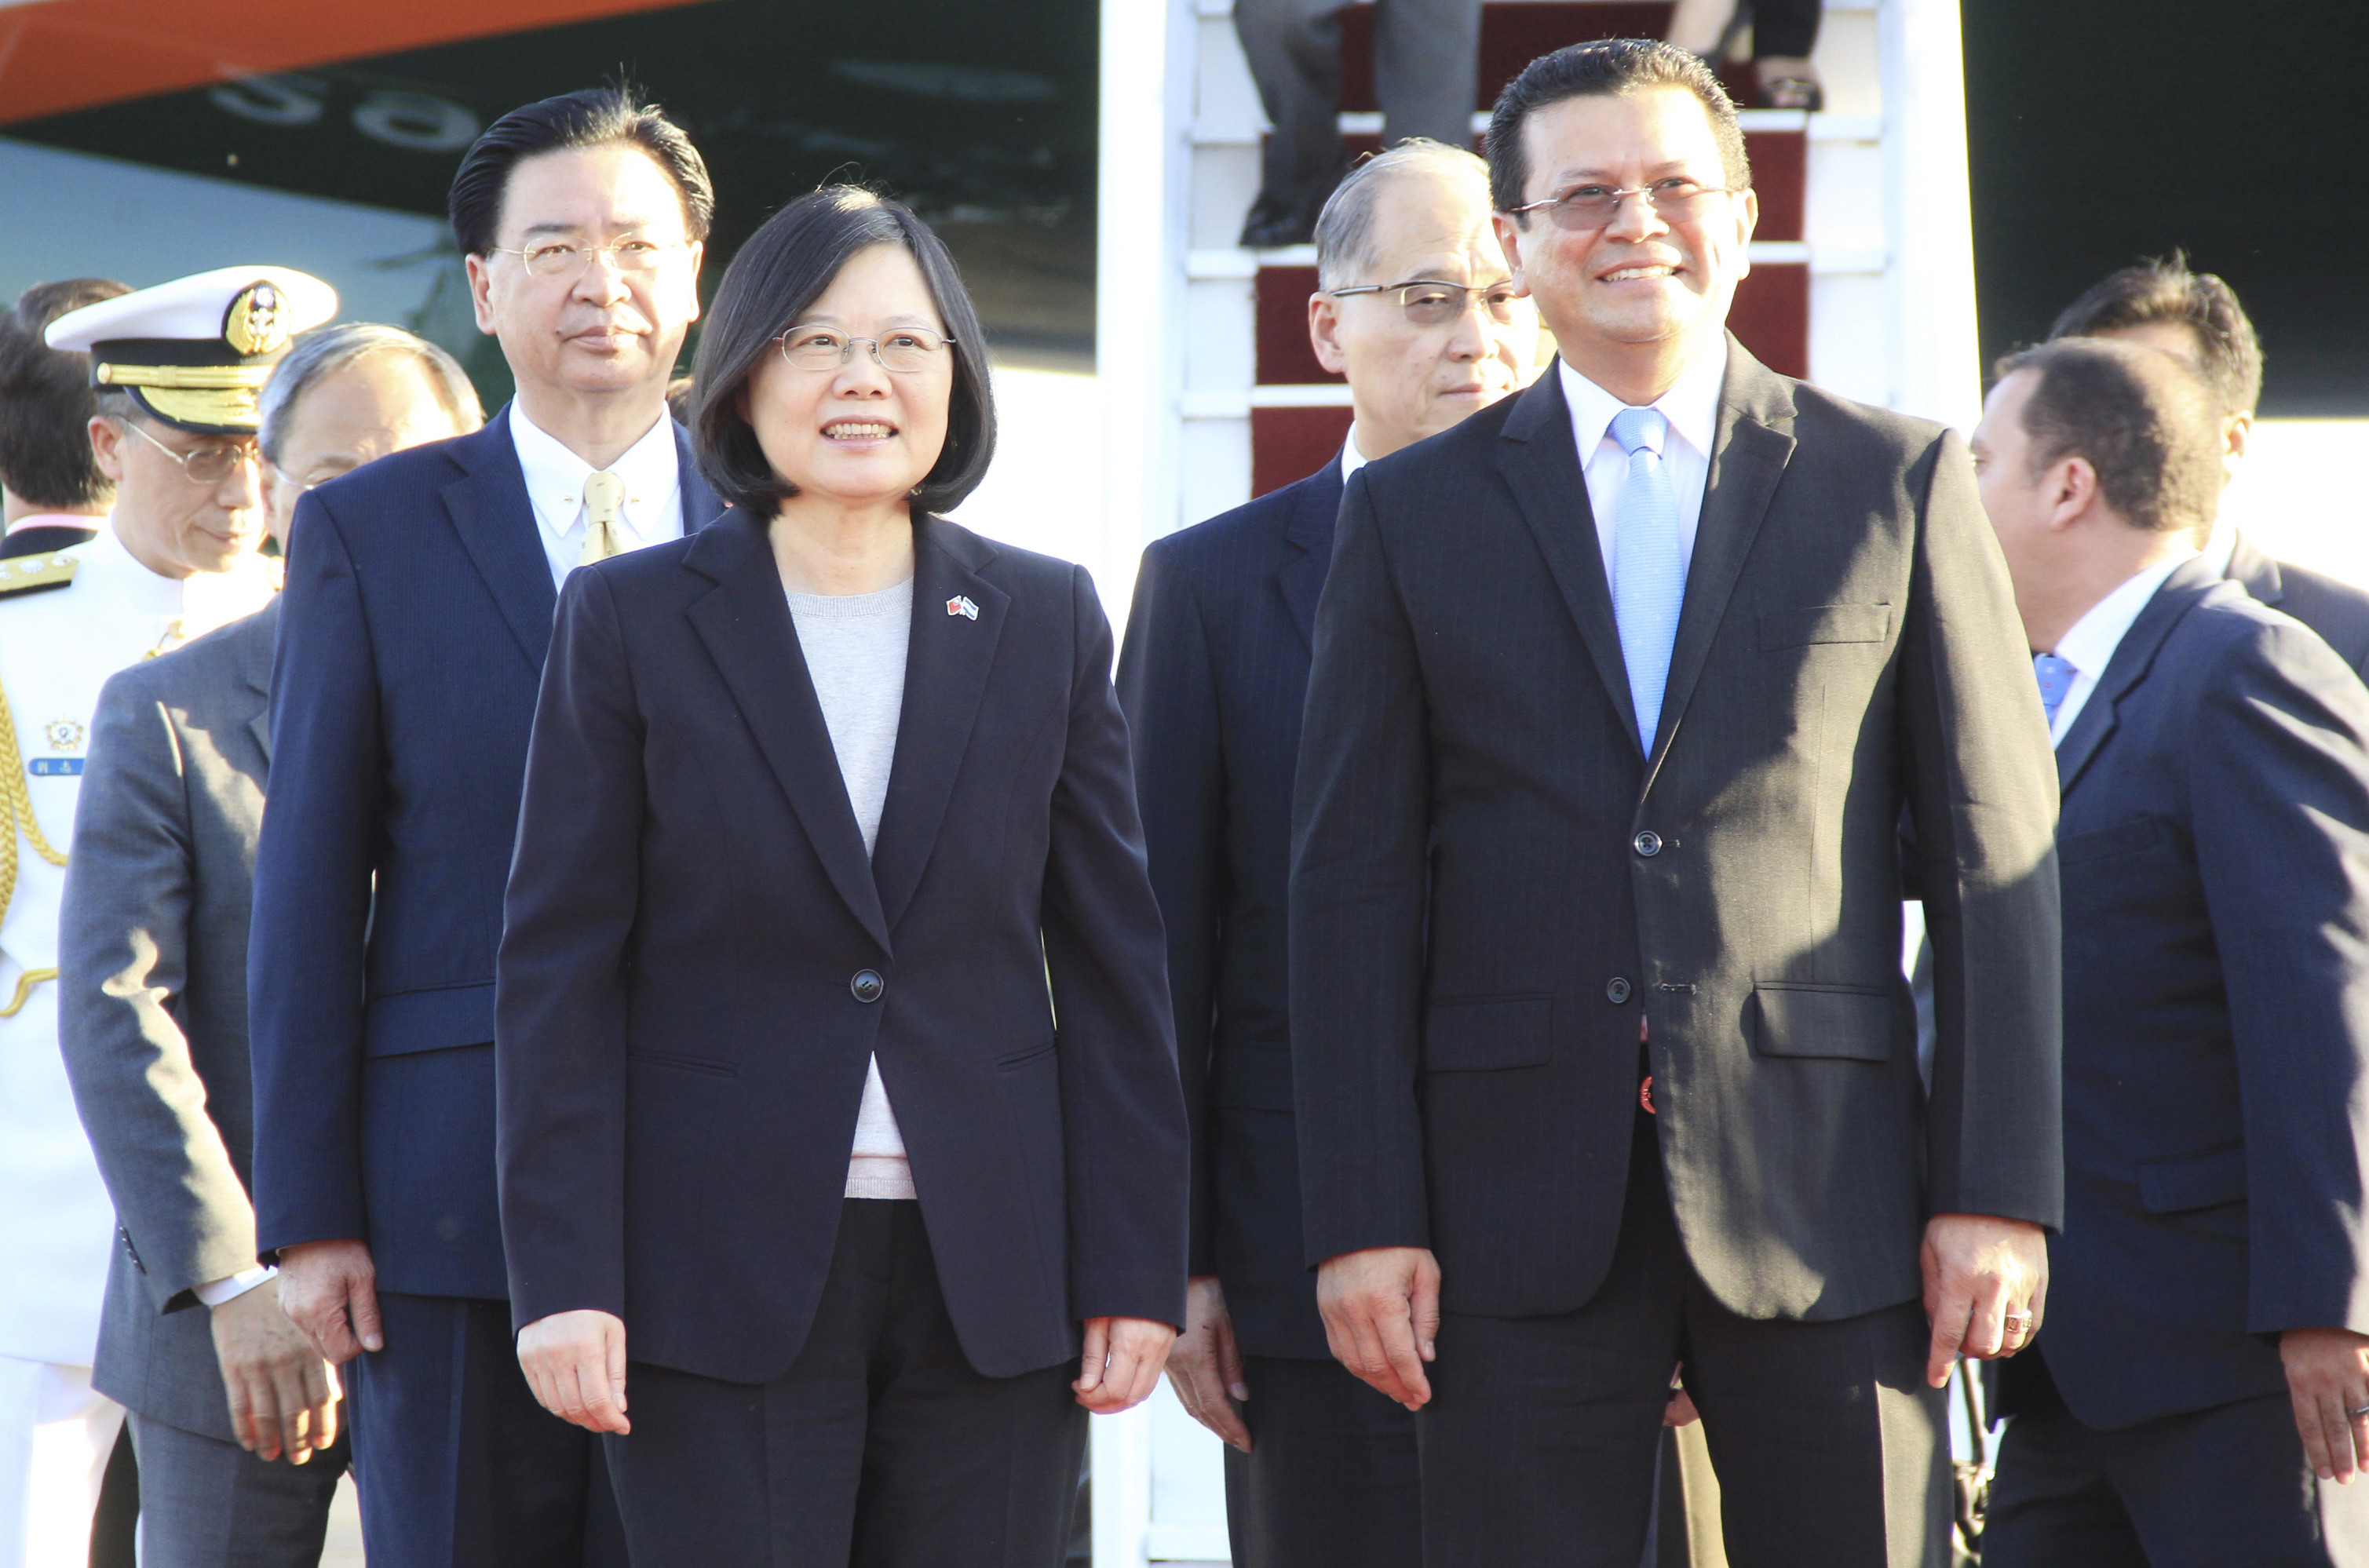 In this handout photo provided by the Salvadorian Chancery, Tsai Ing-wen, President of Taiwan, left, and the Chancellor of the Republic of El Salvador, Hugo Mart&iacute;nez, look on during her arrival at the &Oacute;scar Arnulfo Romero International Airport on Jan. 12, 2017, in La Paz, El Salvador (Mario Pascassio/Chancery/Getty Images Latam)